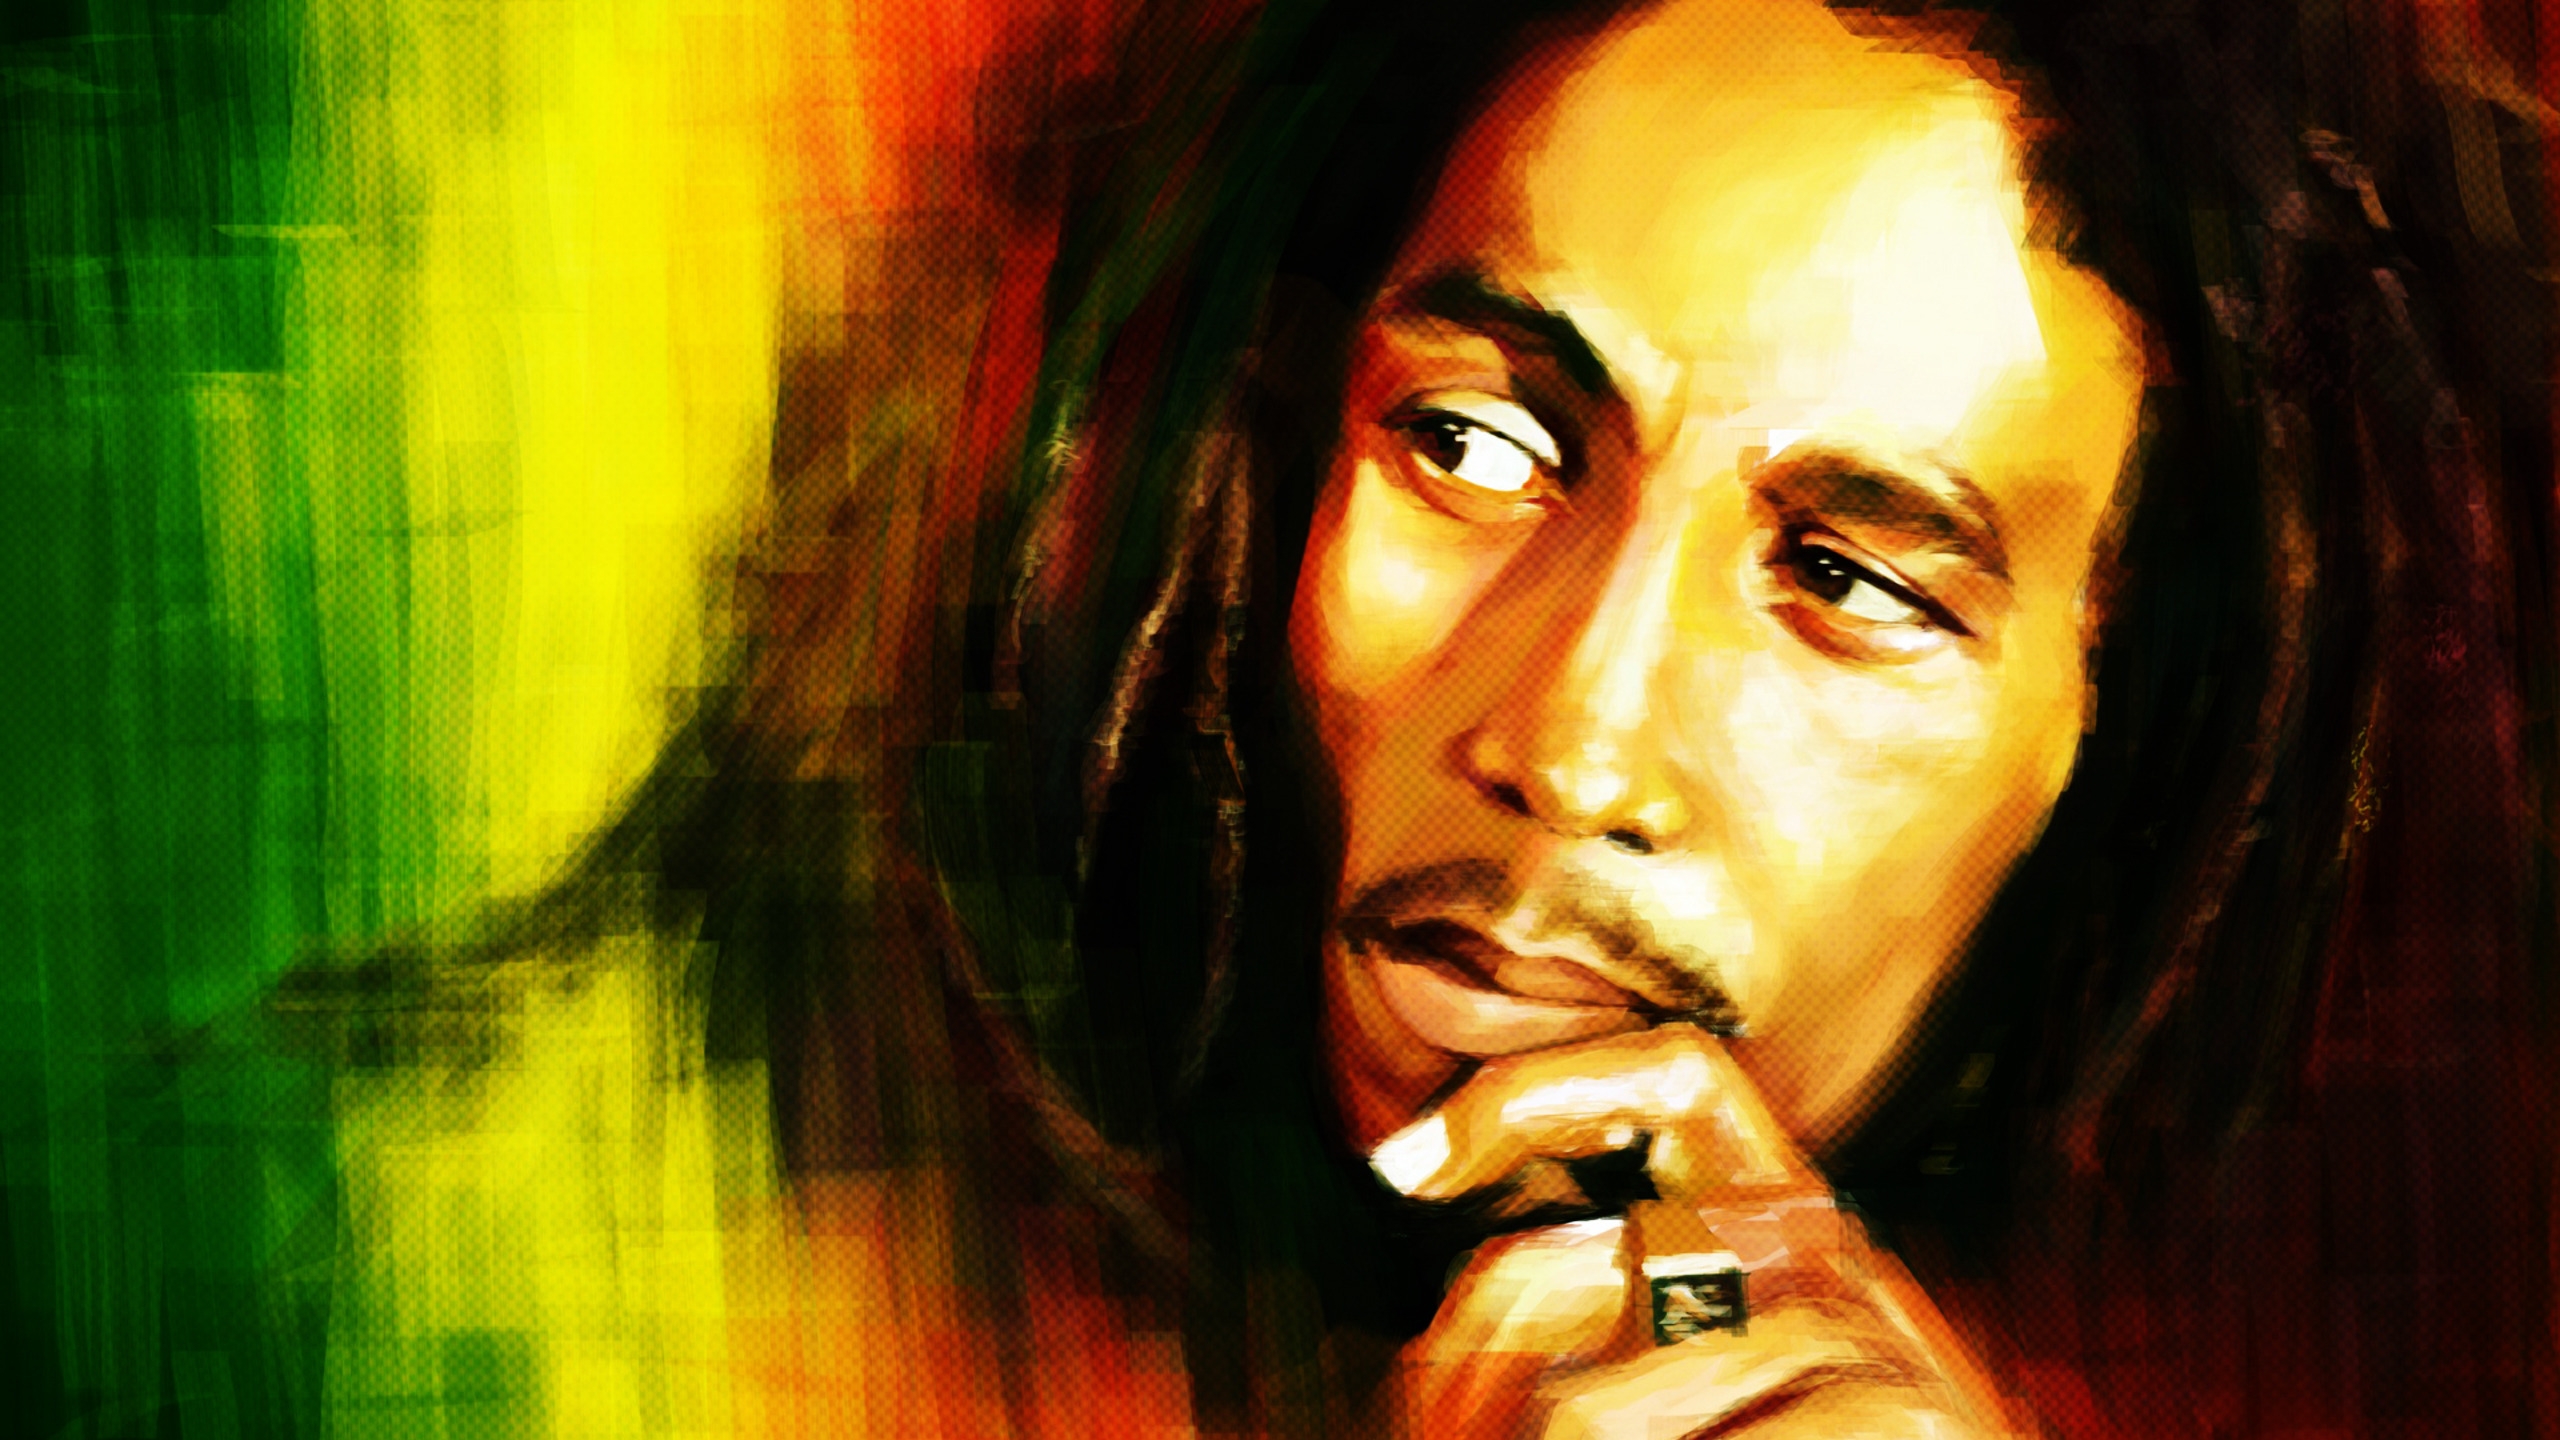 Bob Marley Portrait Painting for 2560x1440 HDTV resolution